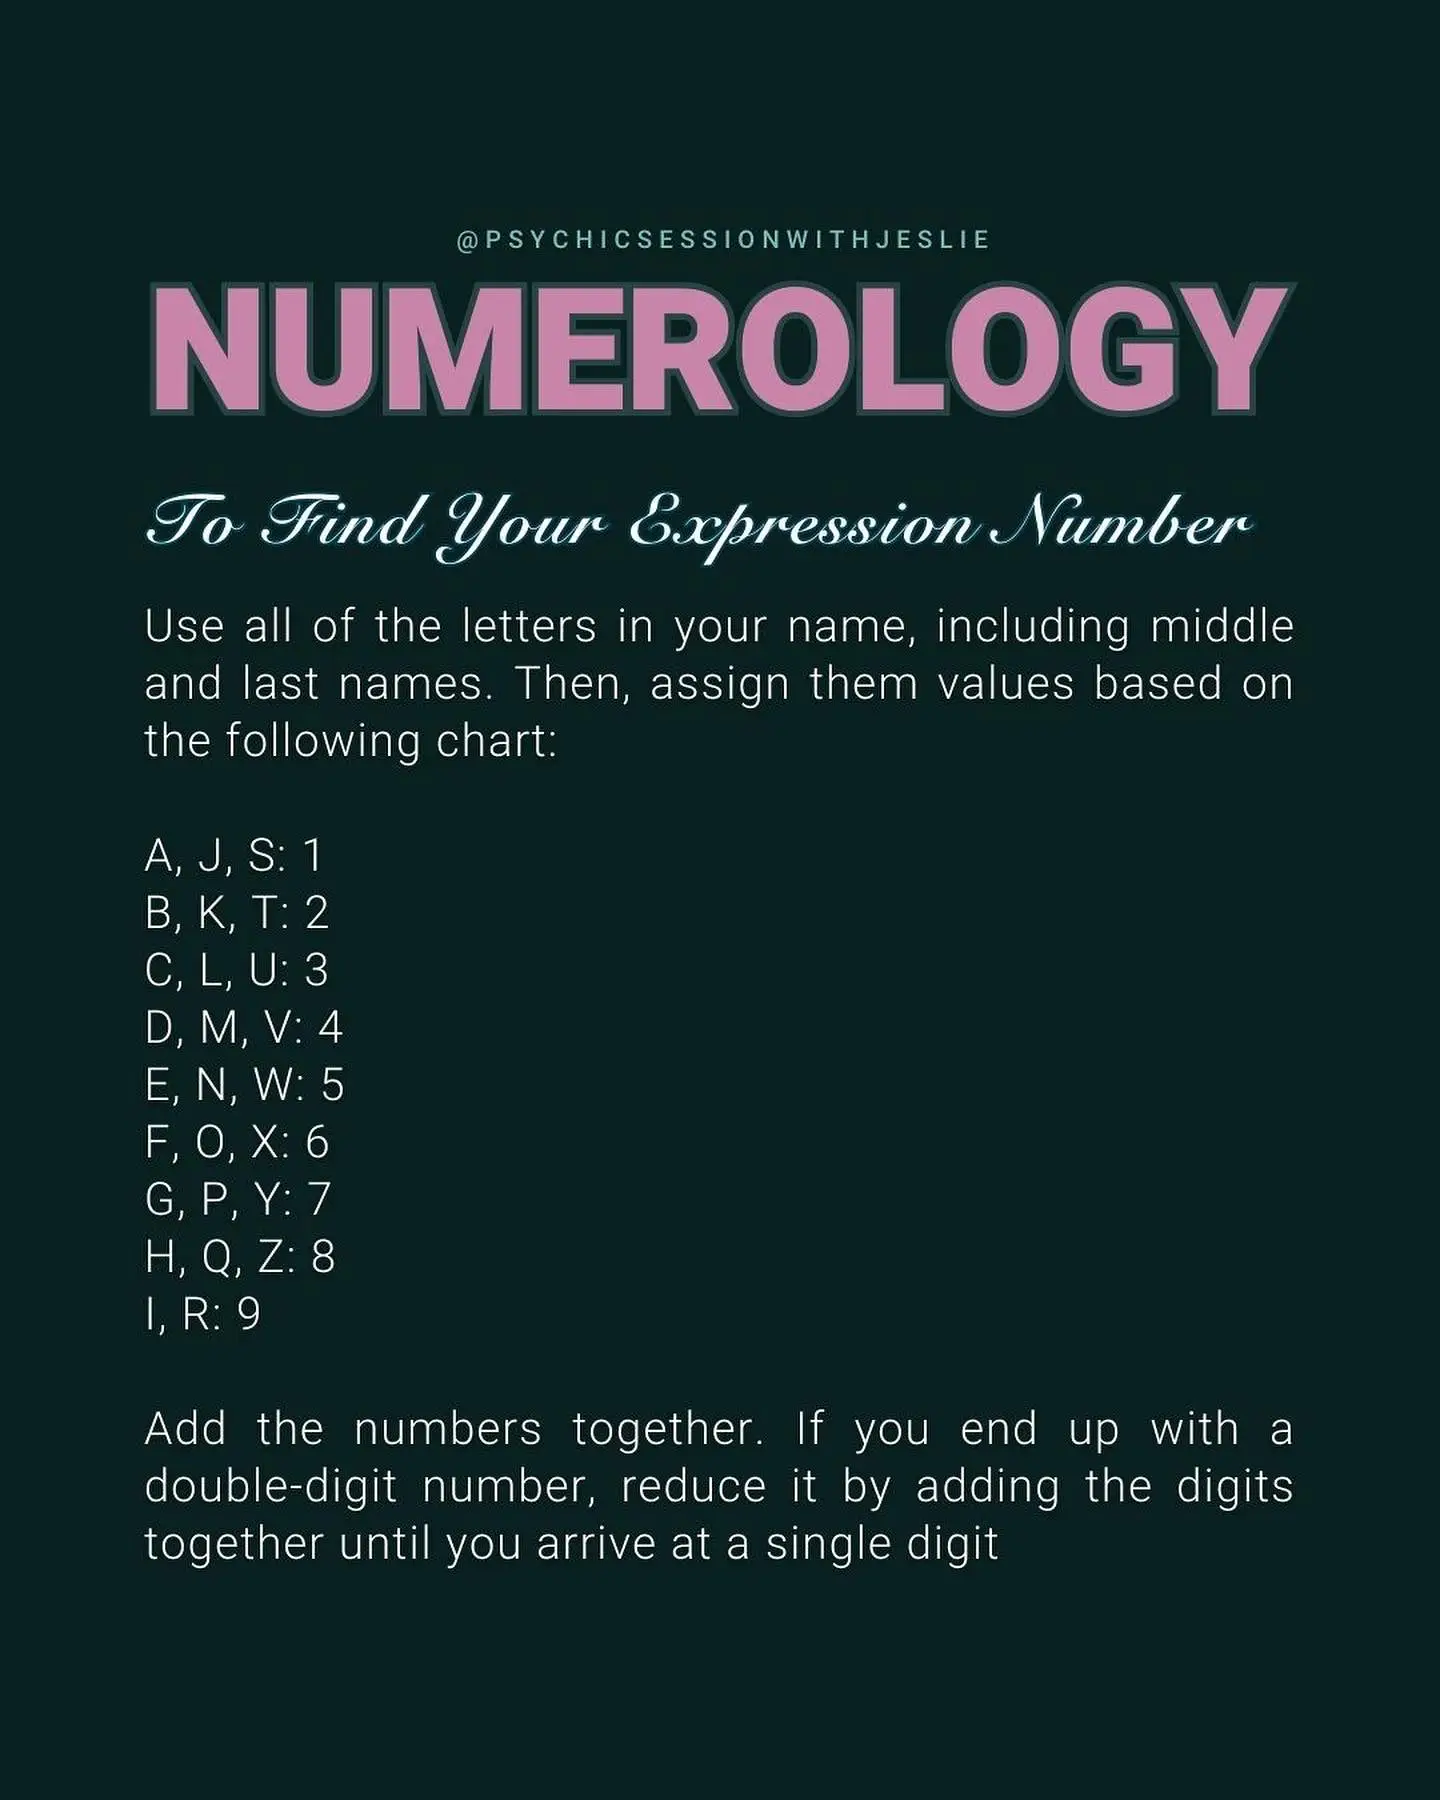 Why Thirty One Is A Significant Age in Numerology - Lemon8 Search